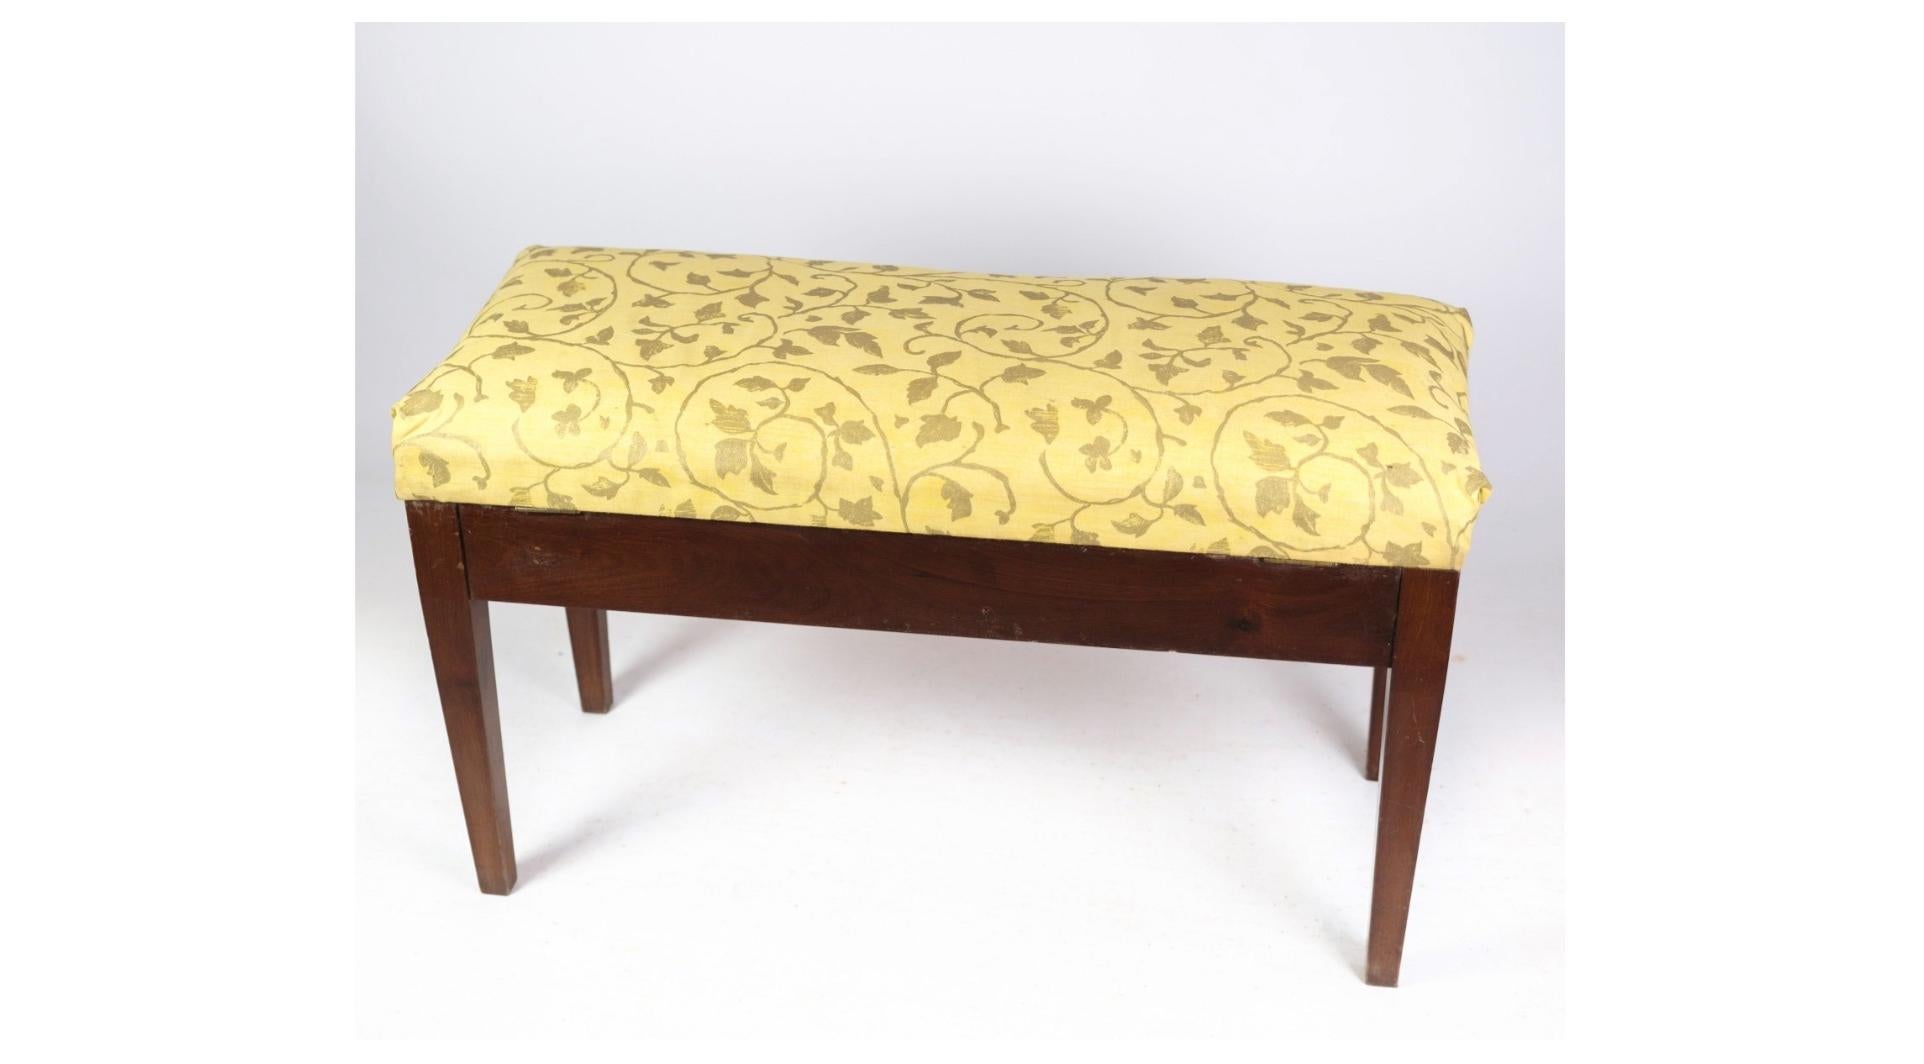 Piano bench / stool in mahogany with light floral fabric from around 1910.
Dimensions in cm: H: 54 W: 89 D: 37
Great condition.